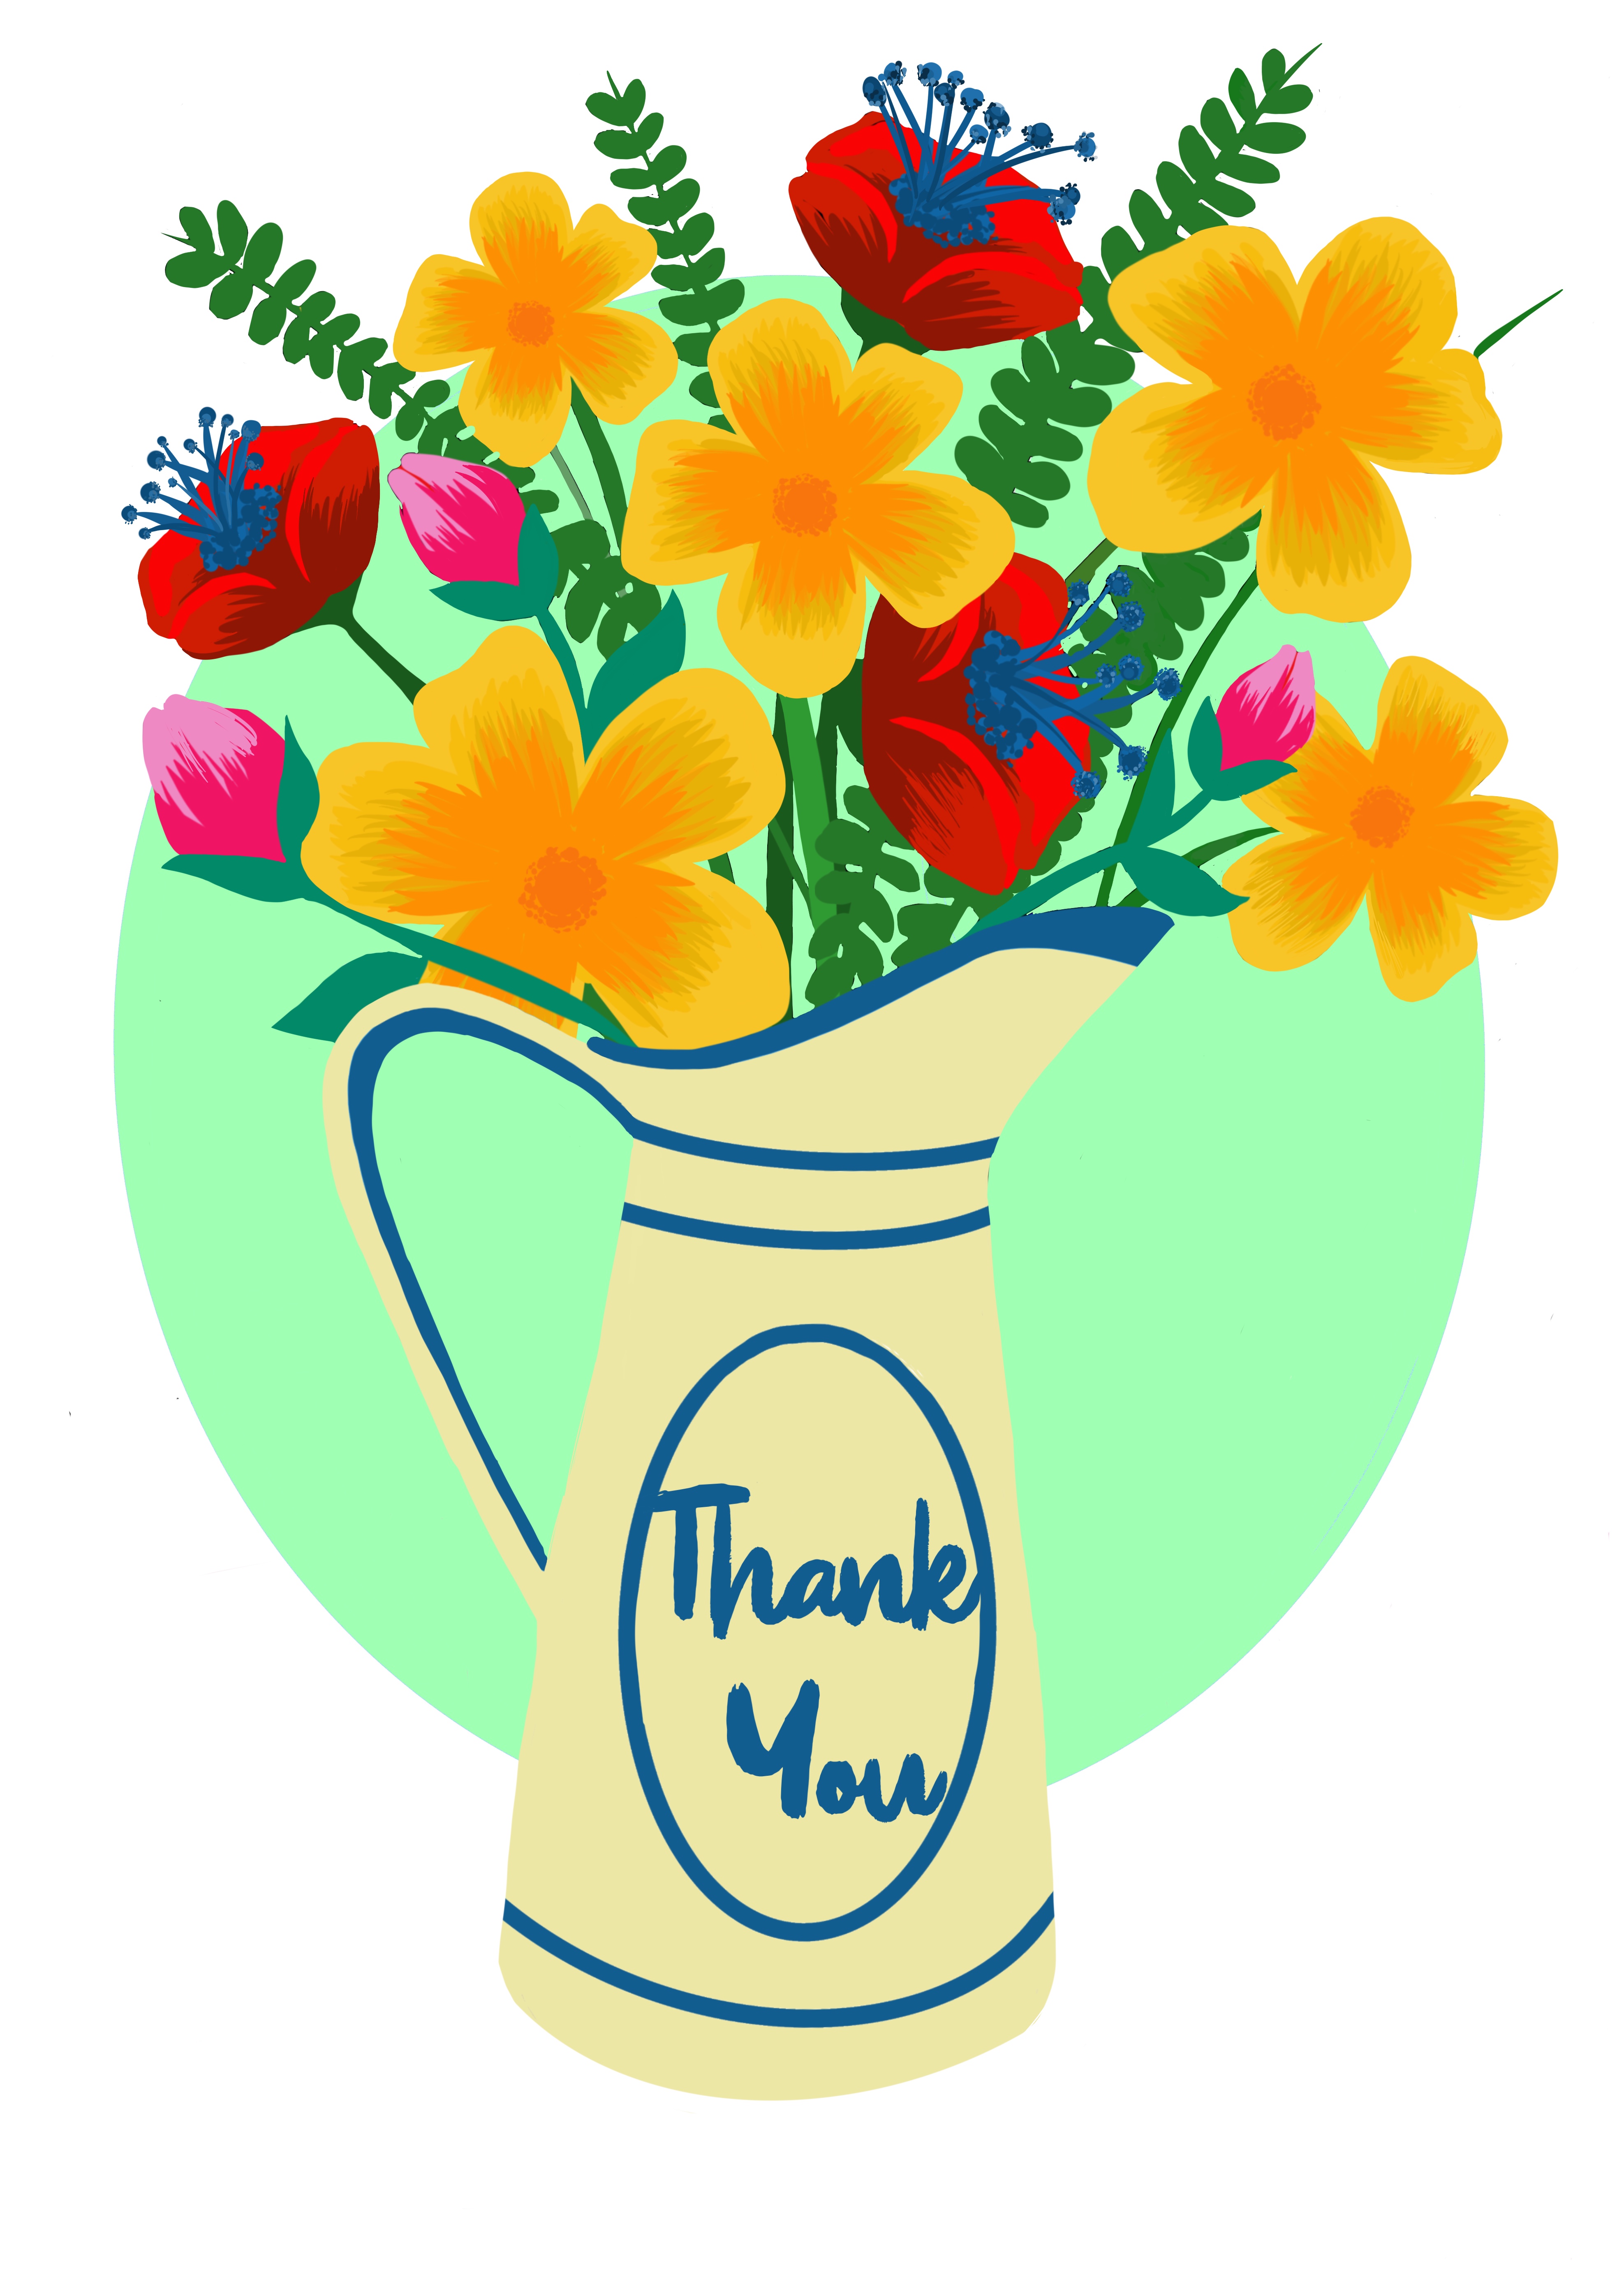 illustration of vase with flowers, on the vase is written thank you